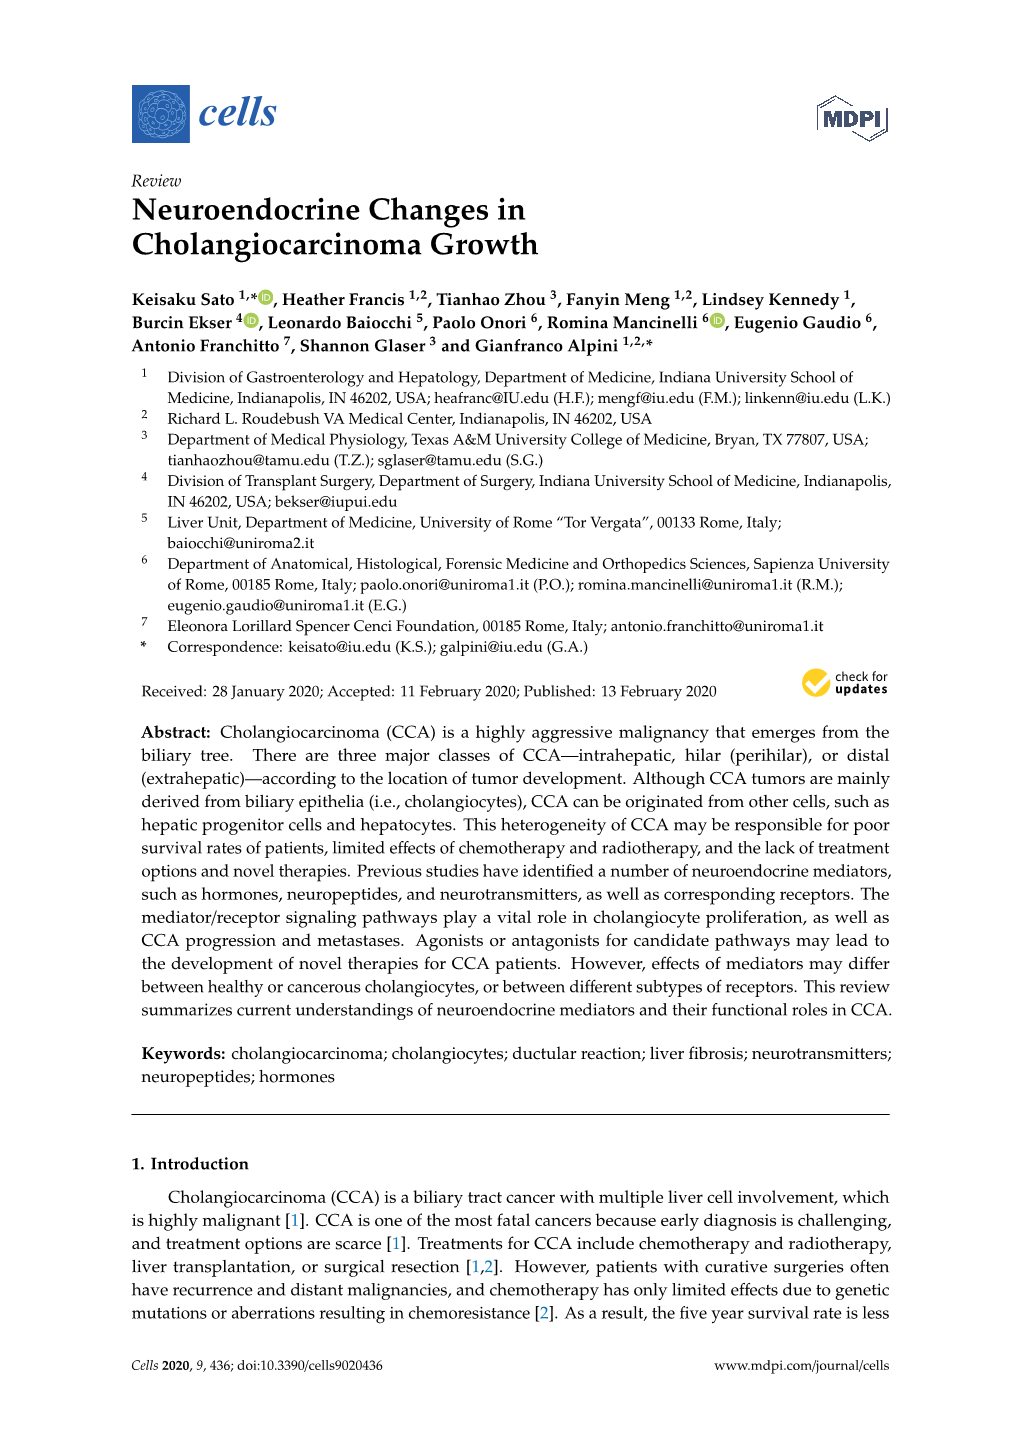 Neuroendocrine Changes in Cholangiocarcinoma Growth